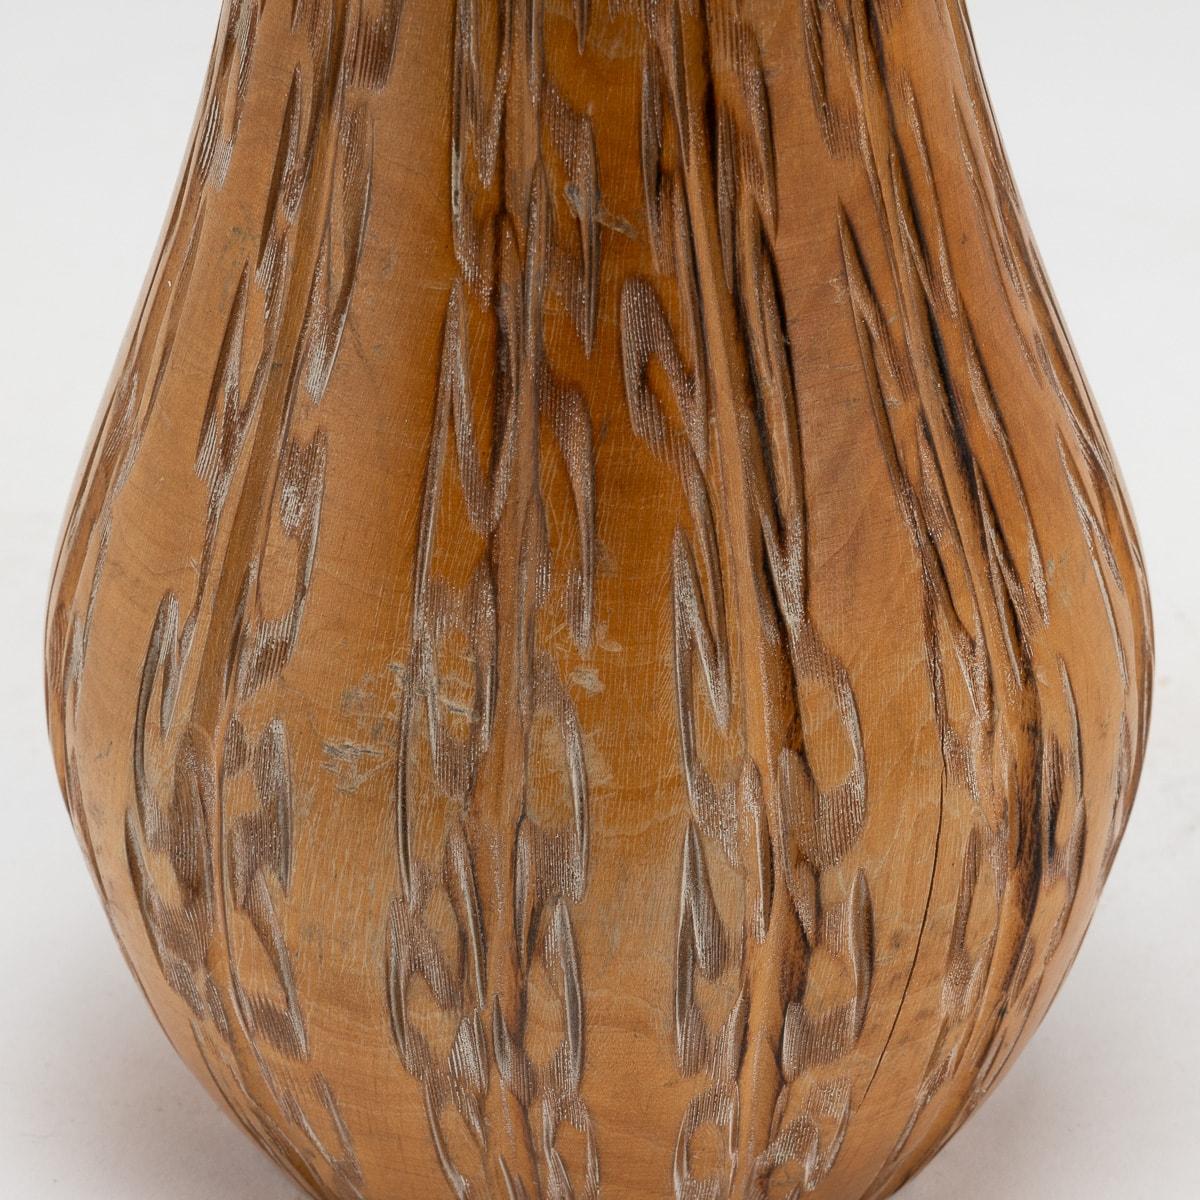 20th Century Italian Carved Wood Flask By Aldo Tura For Macabo c.1960 For Sale 5